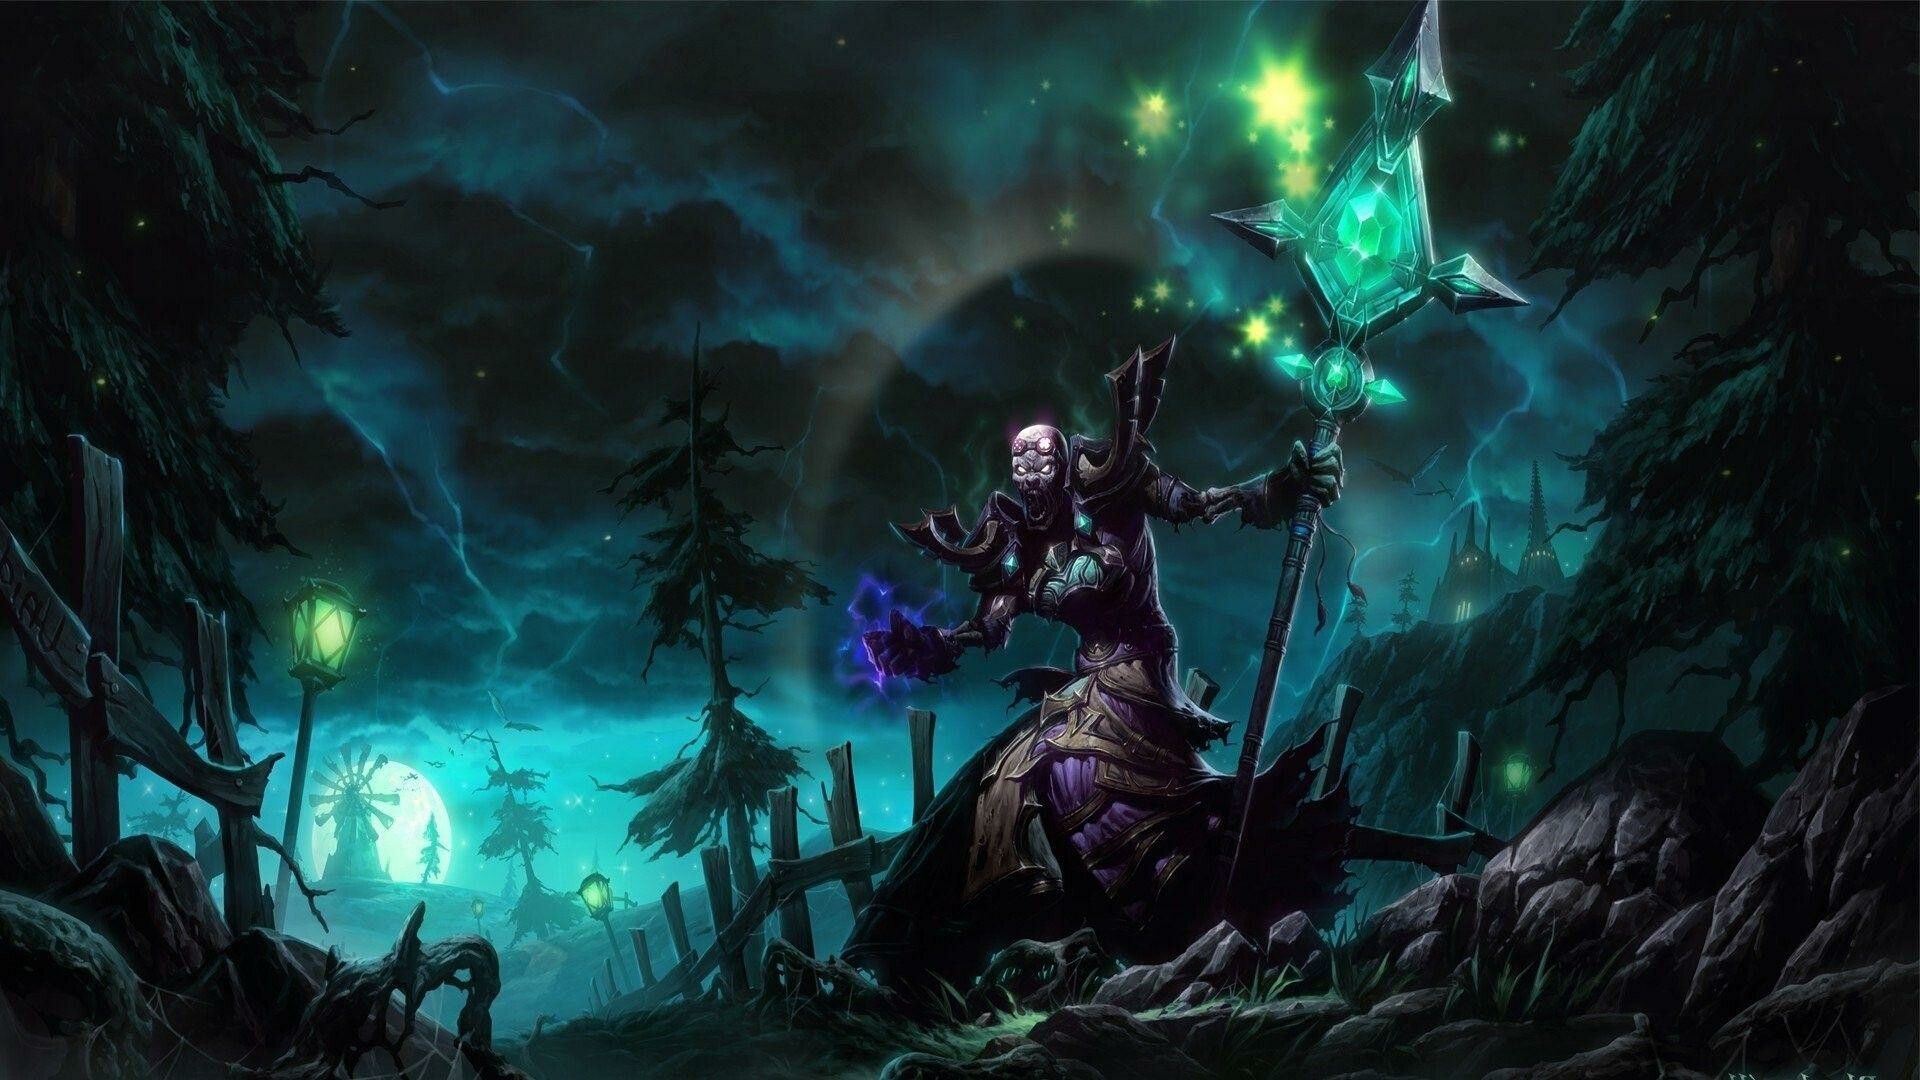 World of Warcraft: Mage, The fourth released game set in the Warcraft universe. 1920x1080 Full HD Wallpaper.